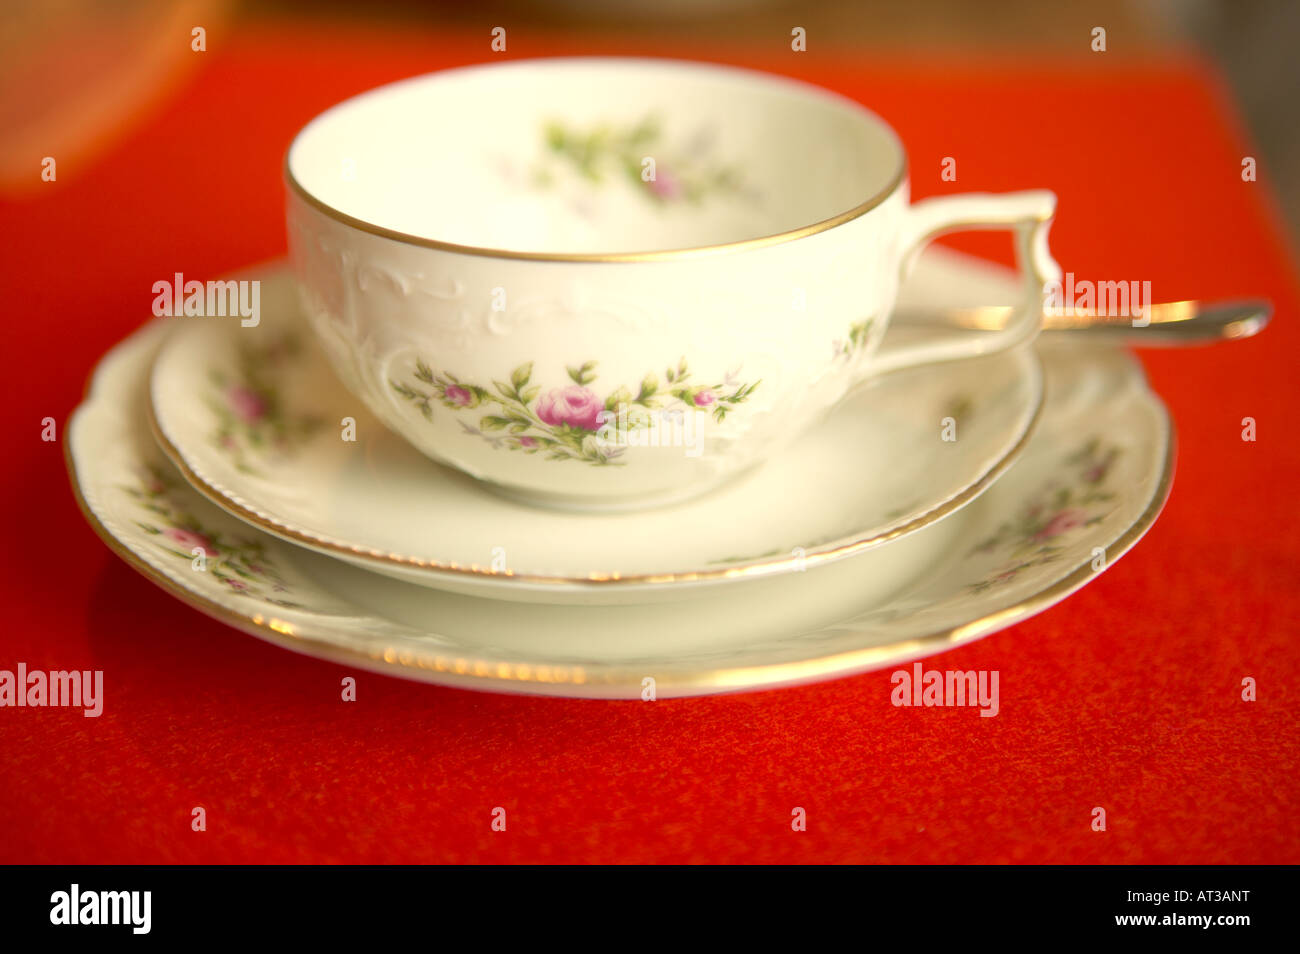 A bone china cup, saucer and plate with a floral design Stock Photo